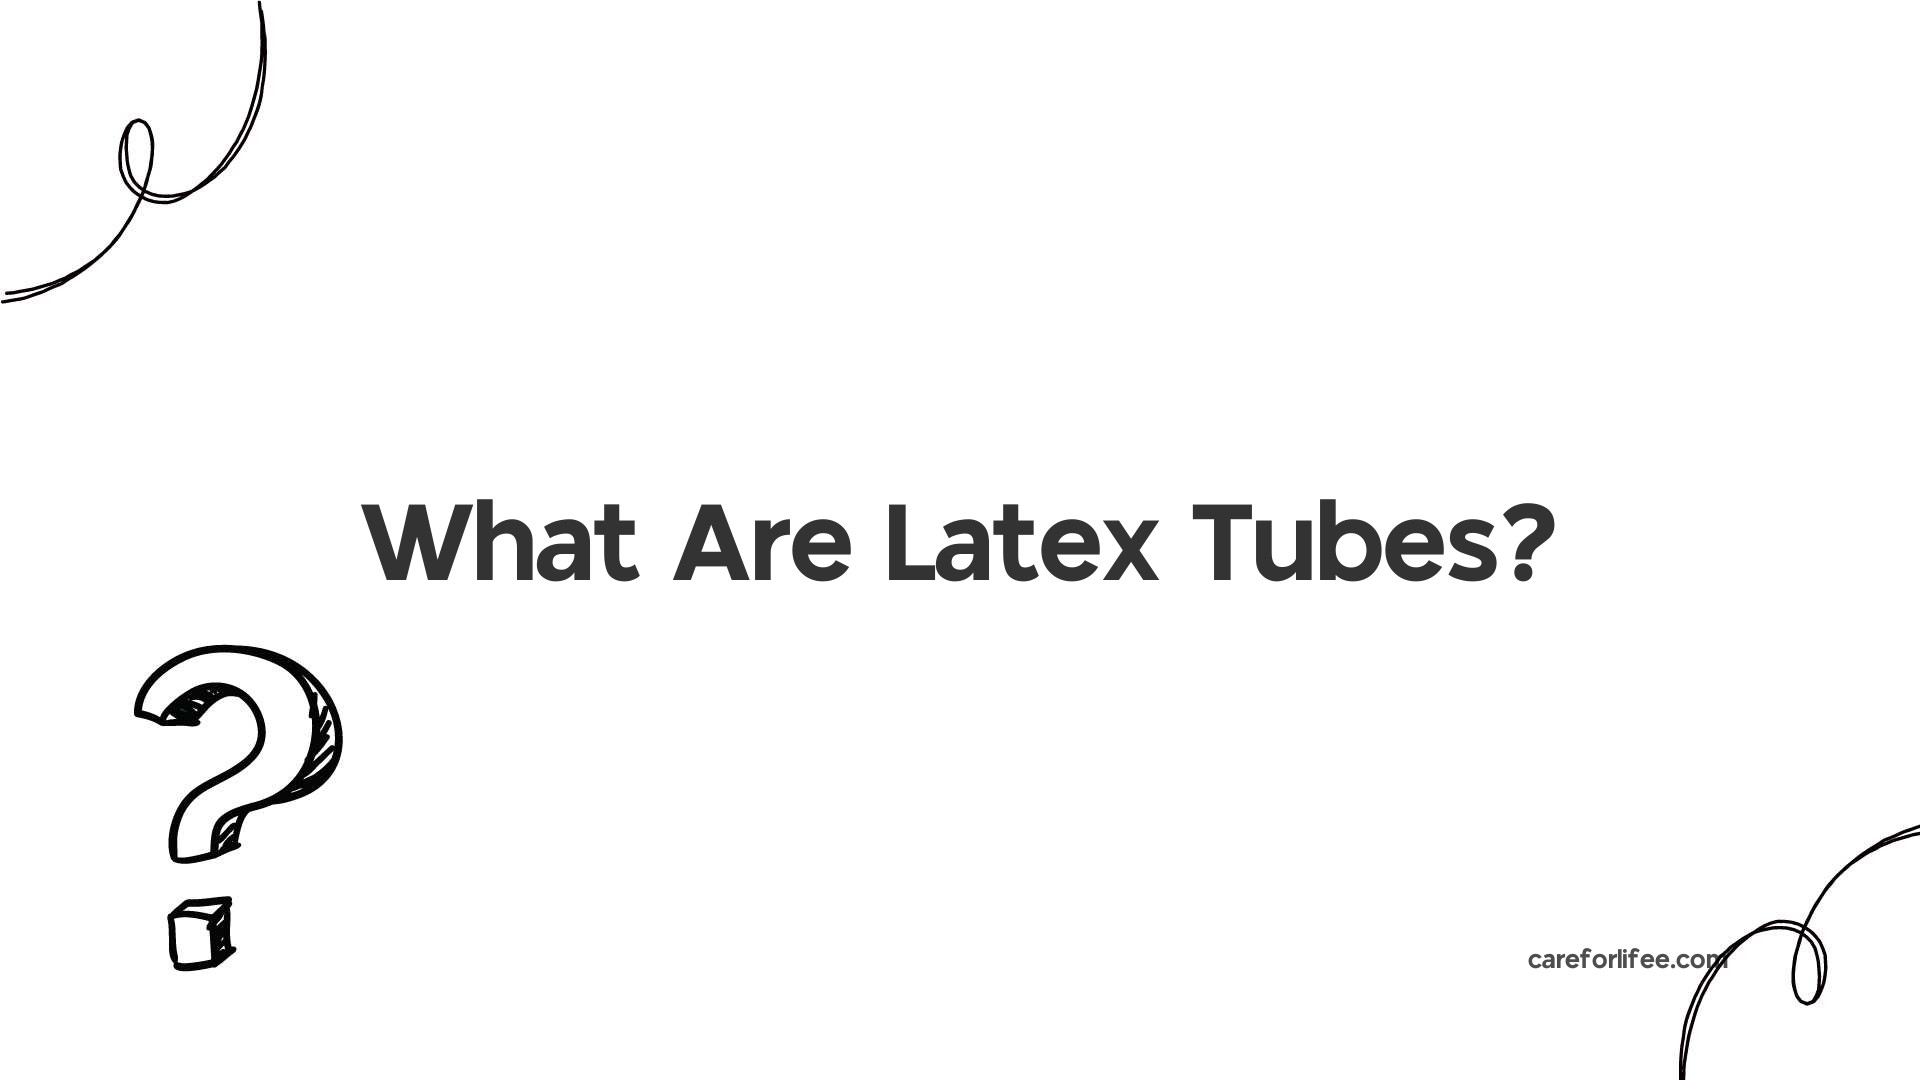 What Are Latex Tubes?